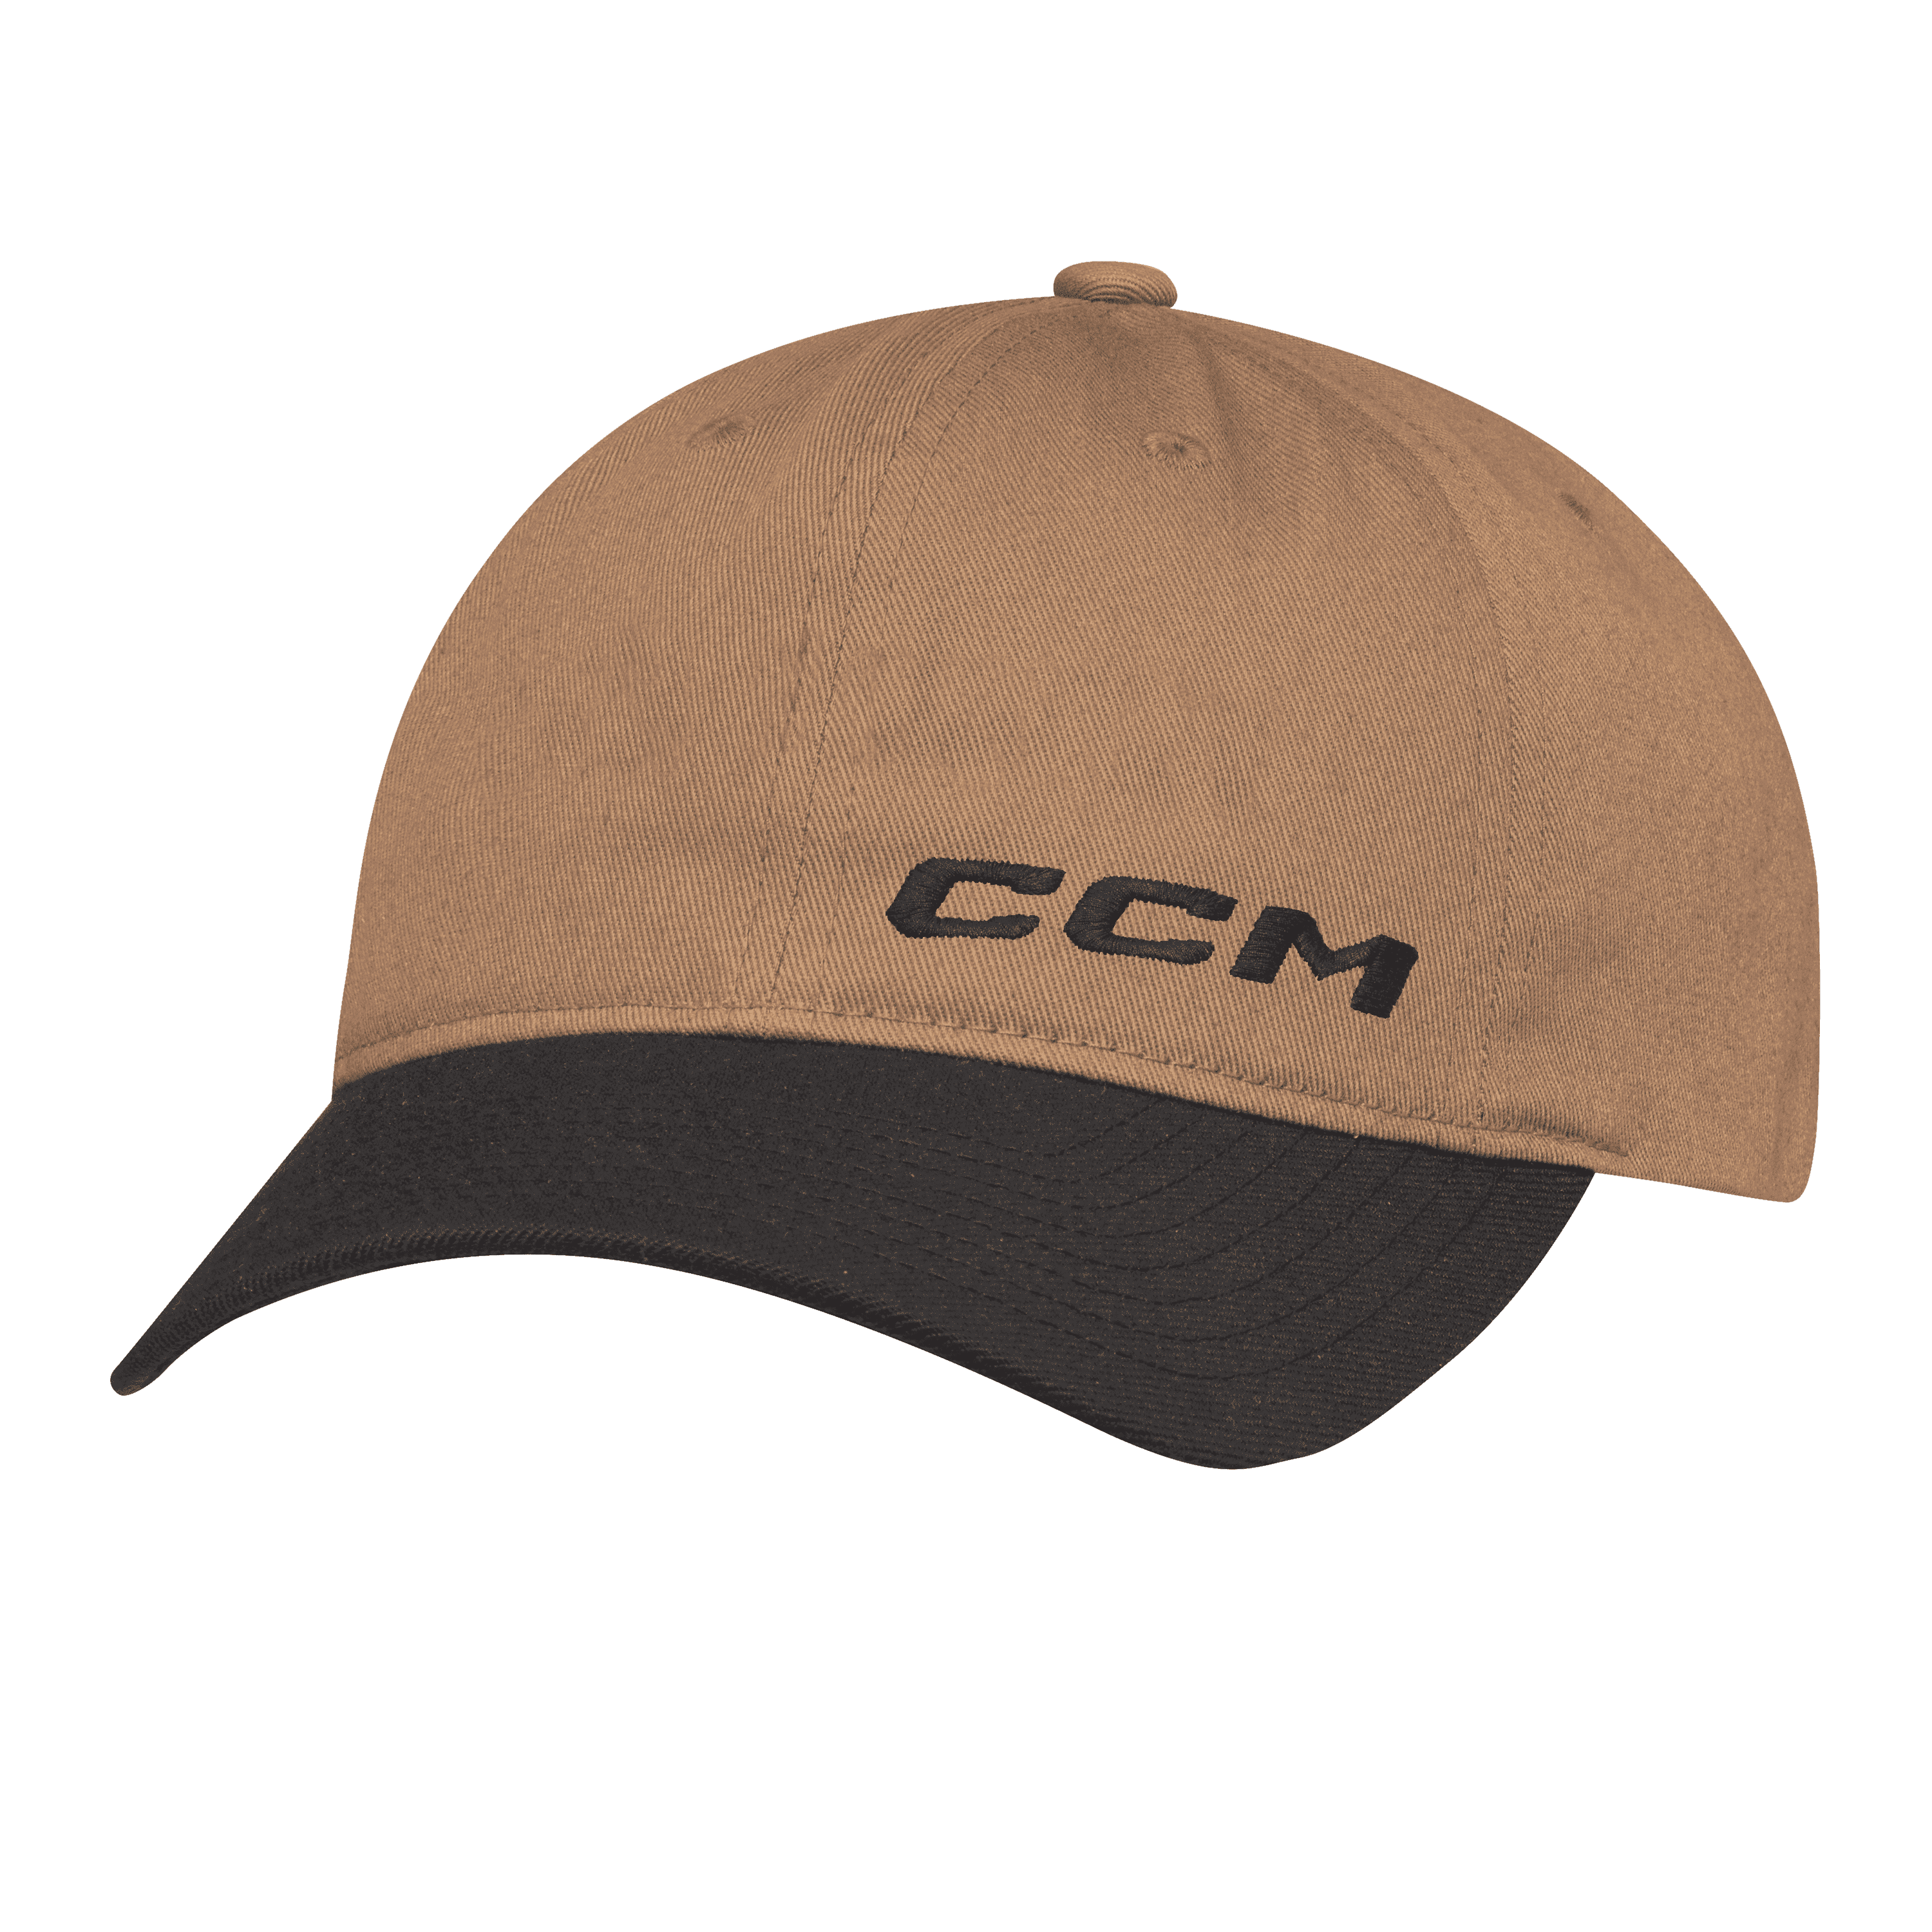 Lifestyle CCM All Outside Slouch Cap SR